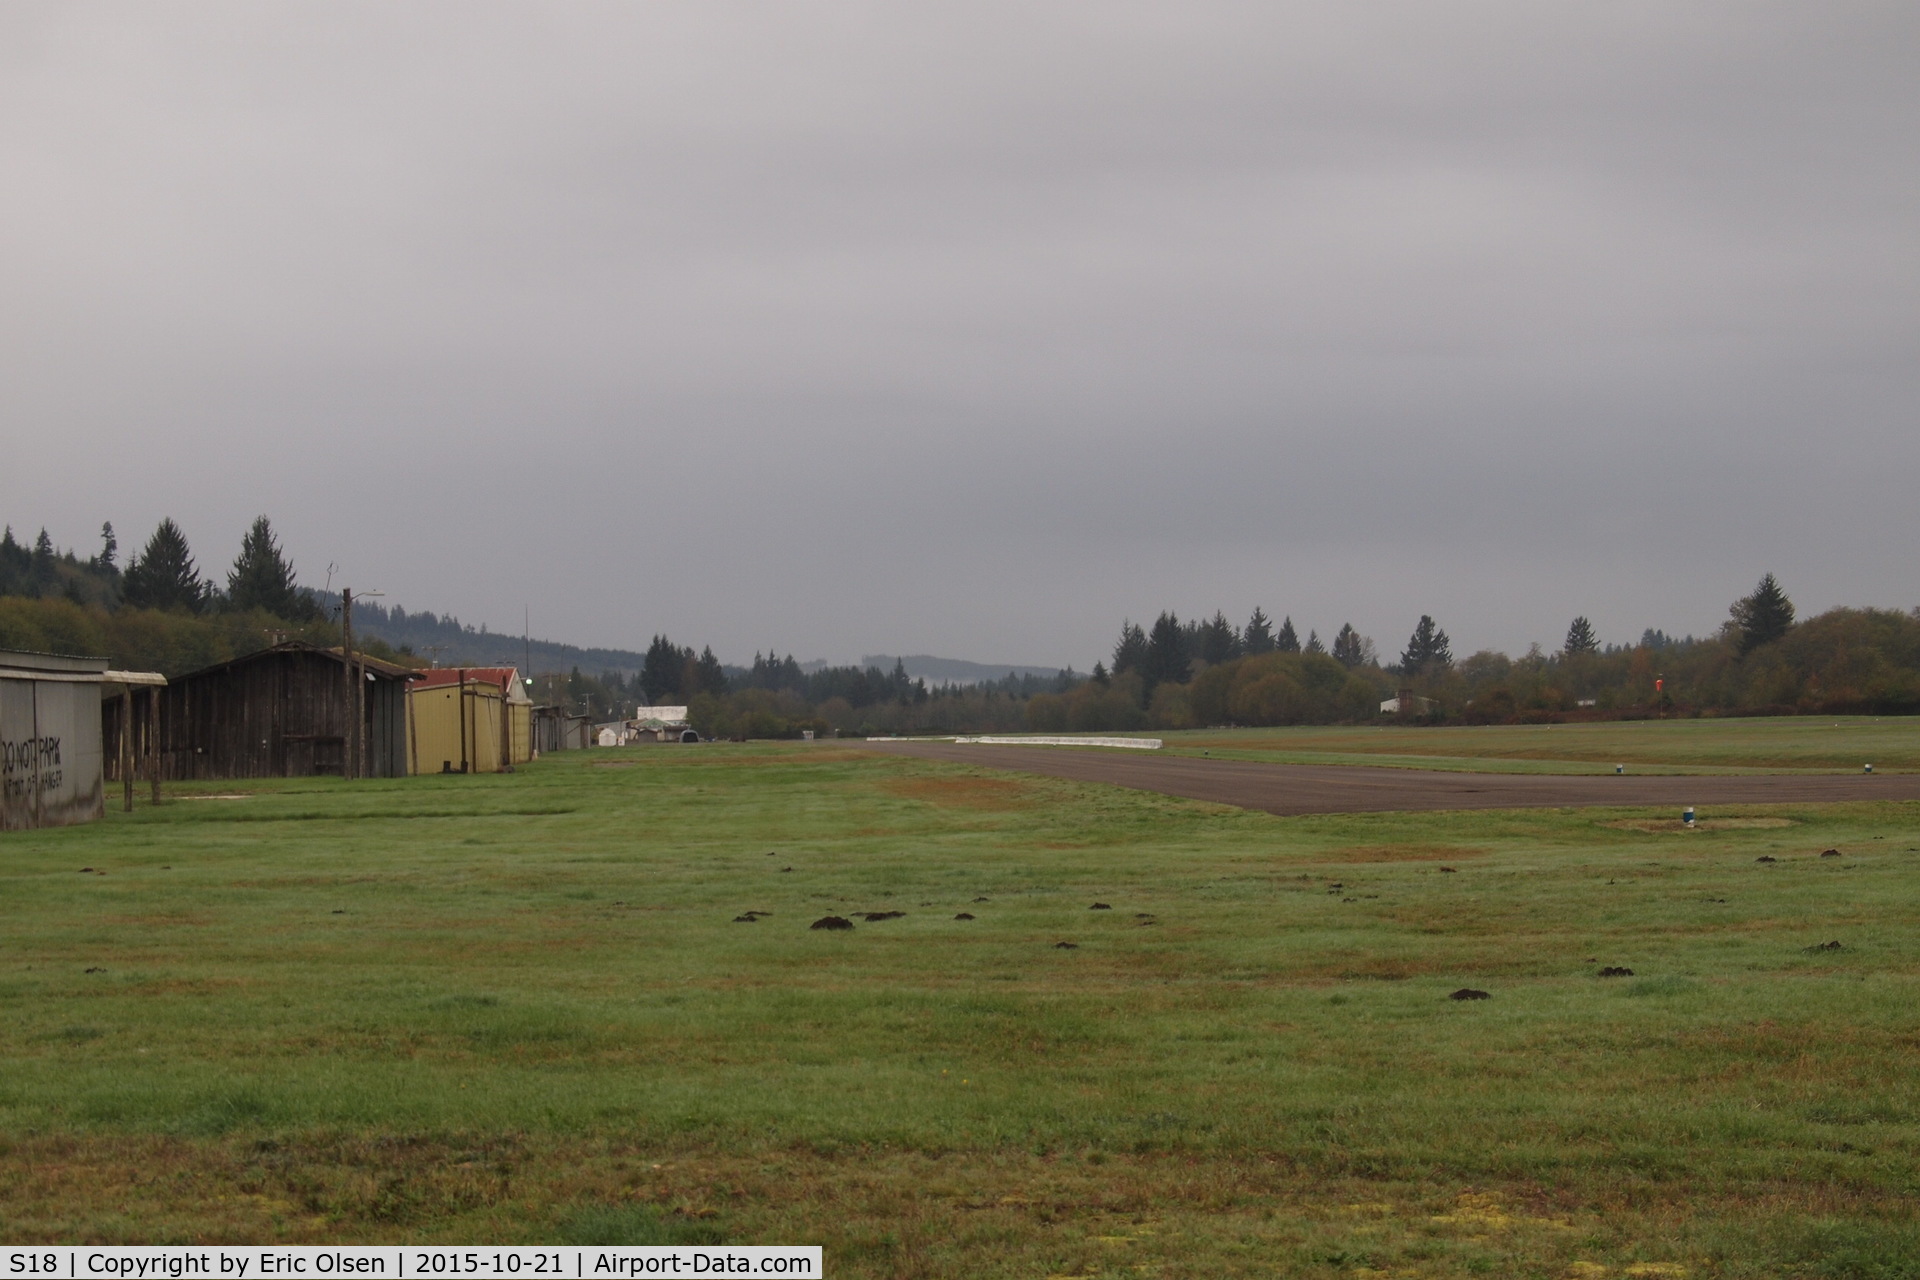 Forks Airport (S18) - Forks Airport as seen from the town side.